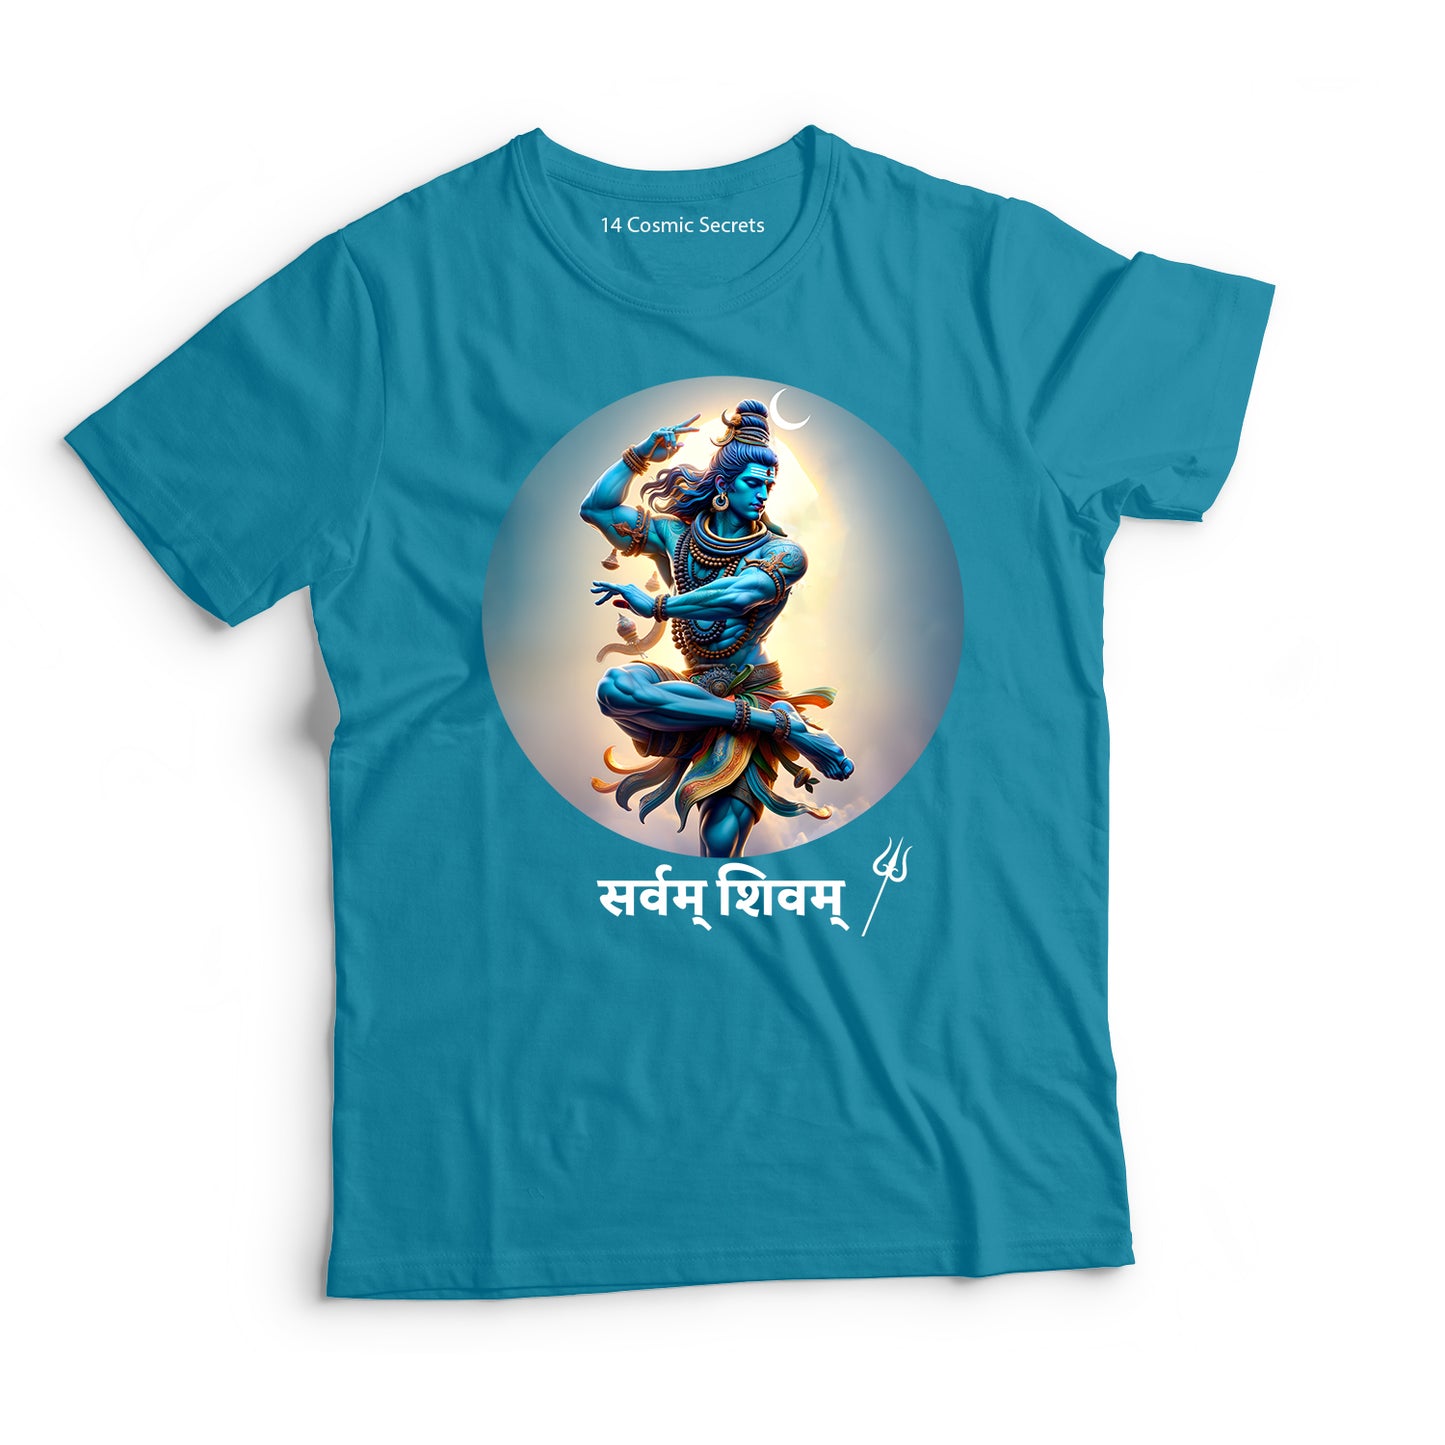 Maha Shiva's Blessing Tee Graphic Printed T-Shirt for Men Cotton T-Shirt Trinity Collection T-Shirt